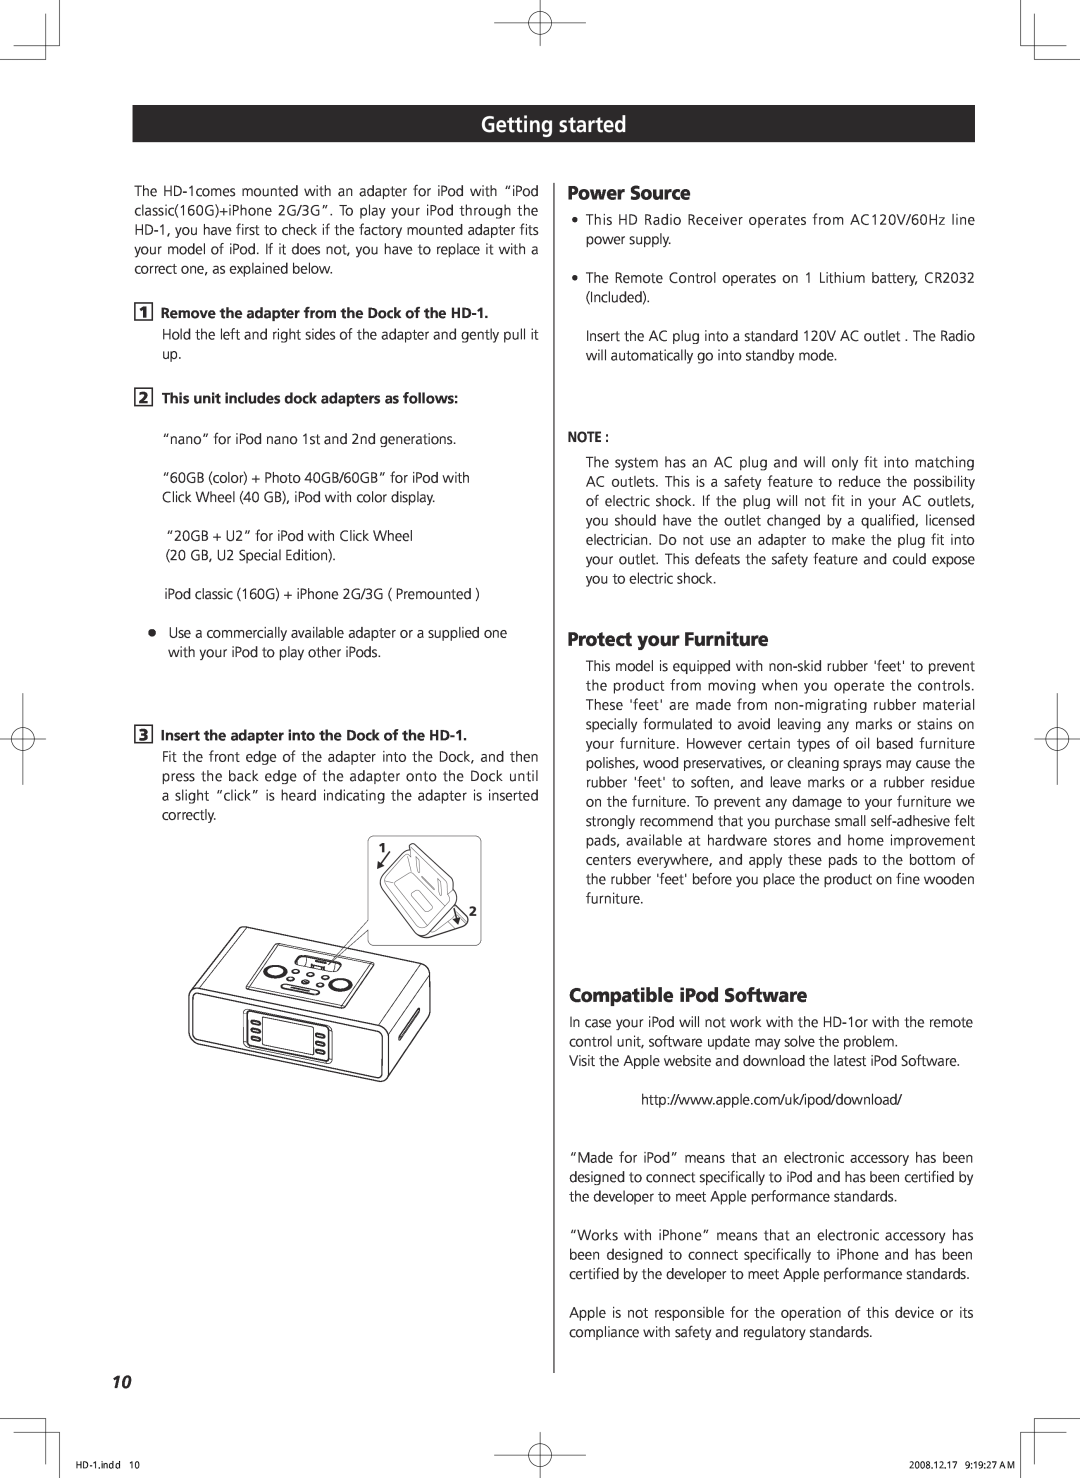 Teac HD-1 owner manual Getting started, Power Source, Protect your Furniture, Compatible iPod Software 